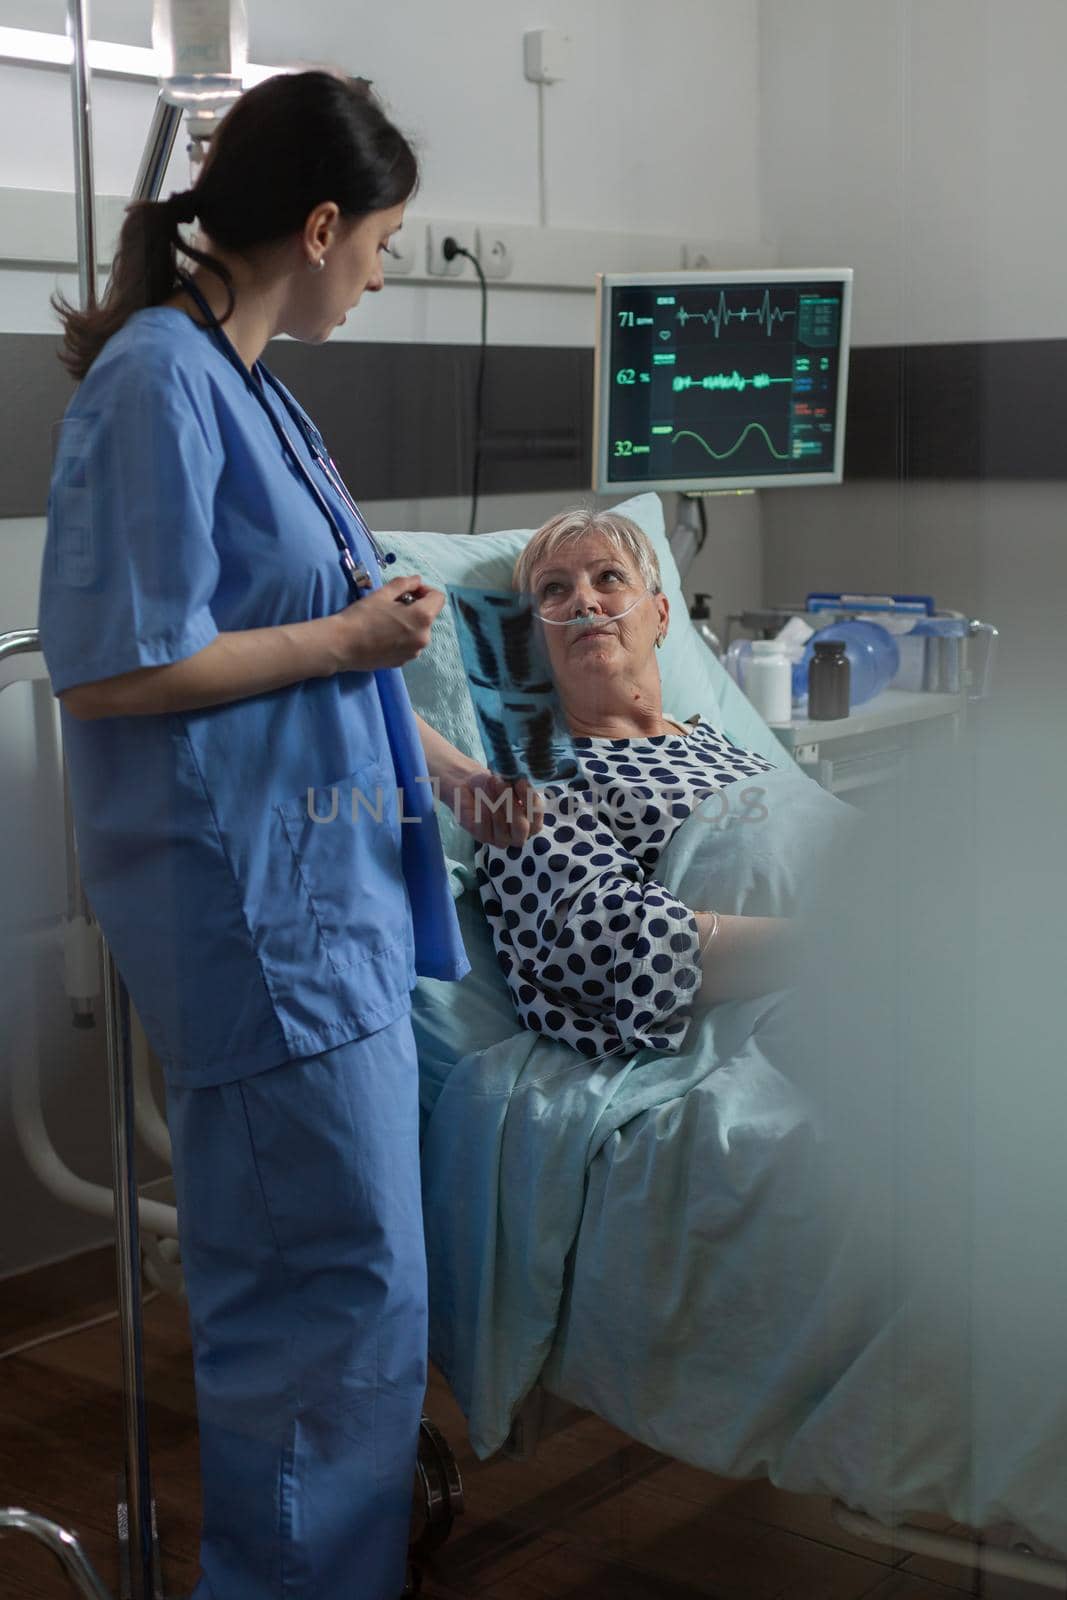 Elderly patient in radiology hospital room laying in bed listening nurse dicussing about chest x-ray radiography for respiratory diagnosis. Breathing with help from oxygen mask.